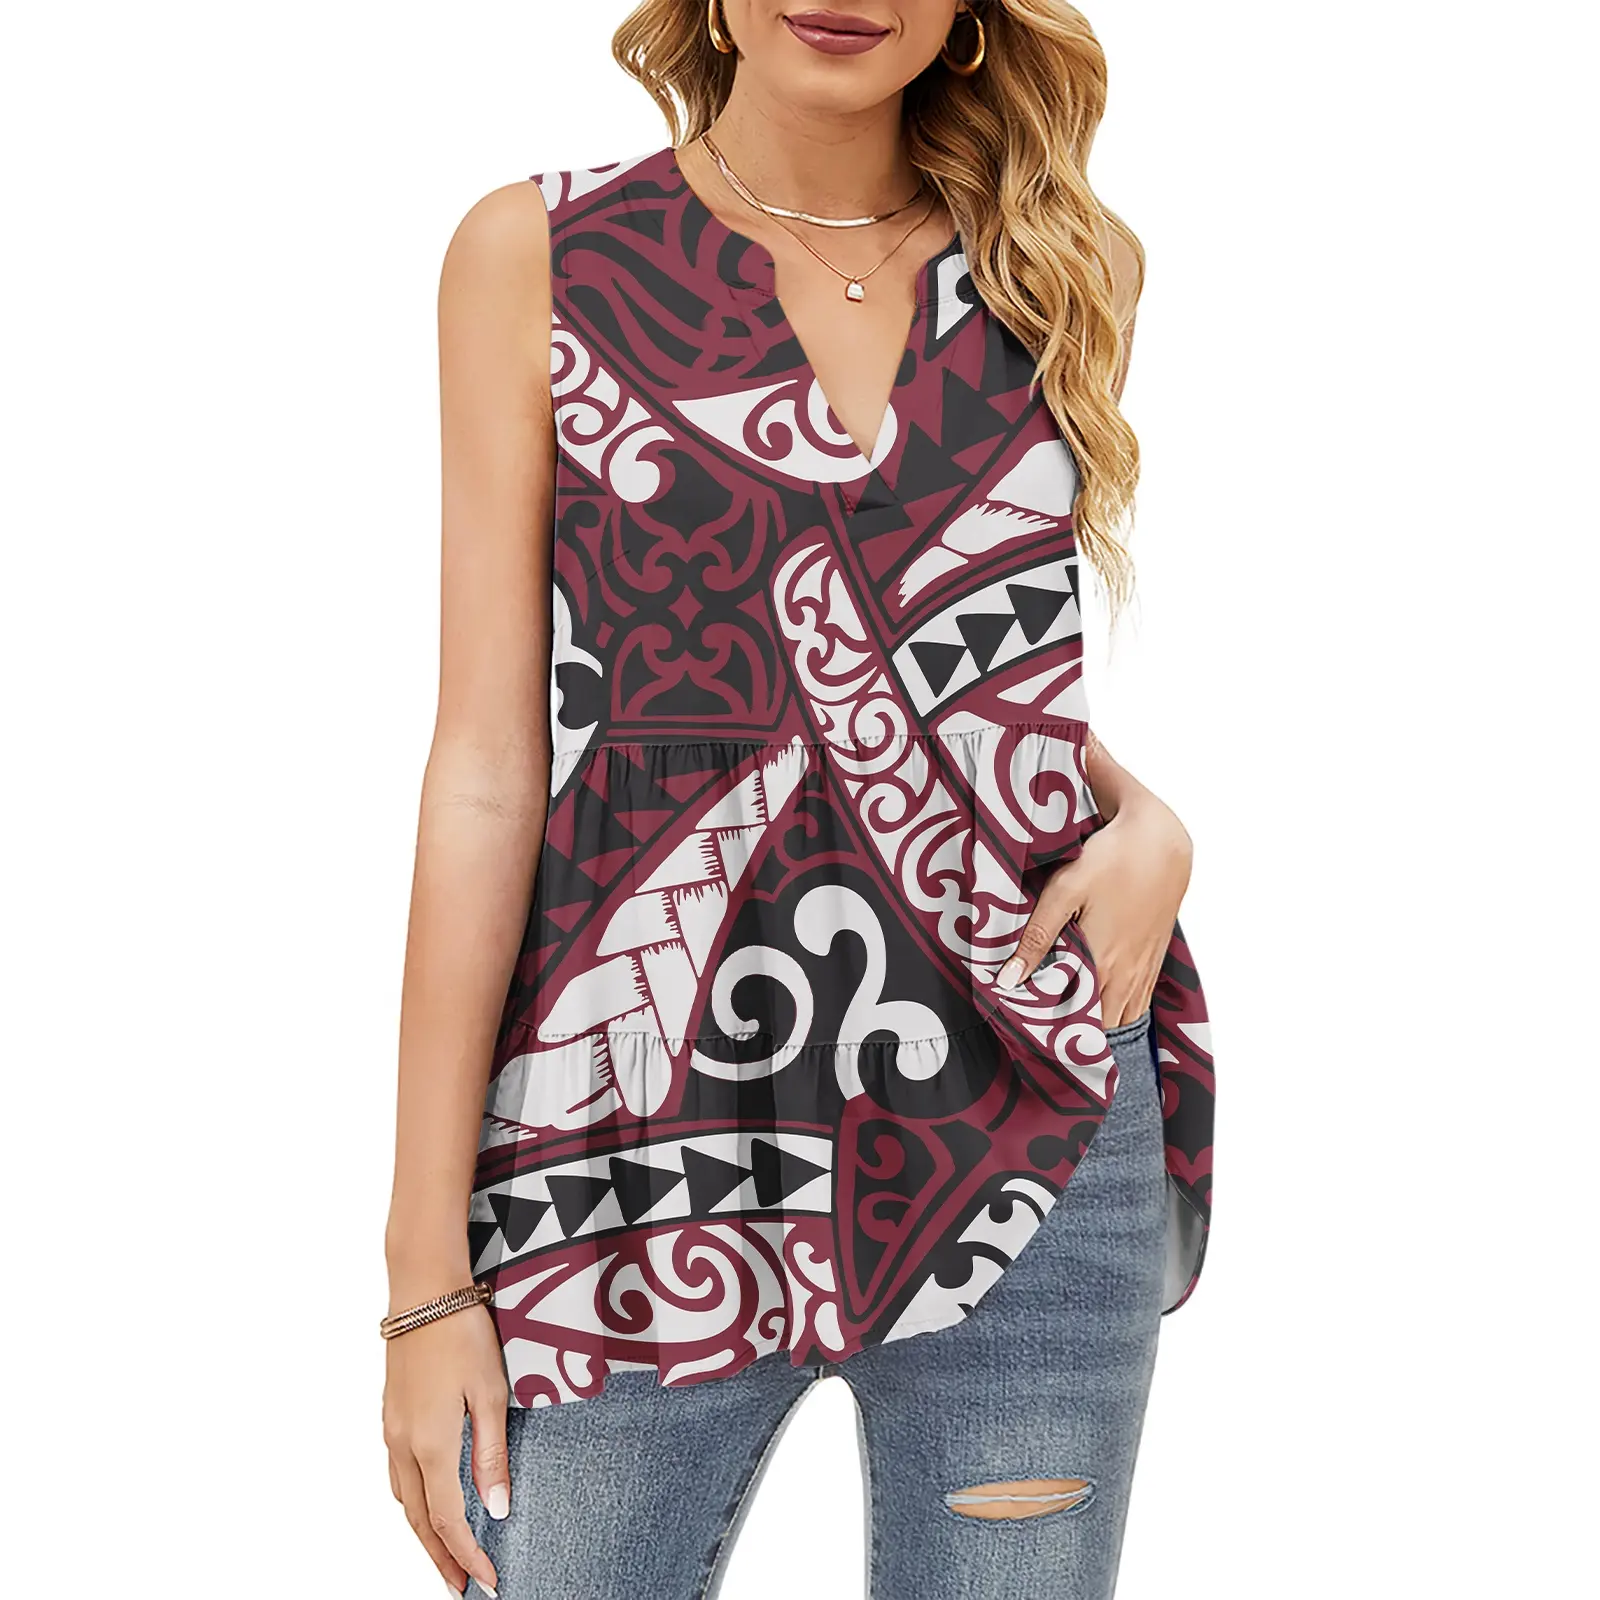 Newest Designed Polynesian Tribal Printed Women Blouses Casual Tops High Quality Lightweight Chiffon Blouse Hawaiian Blouse